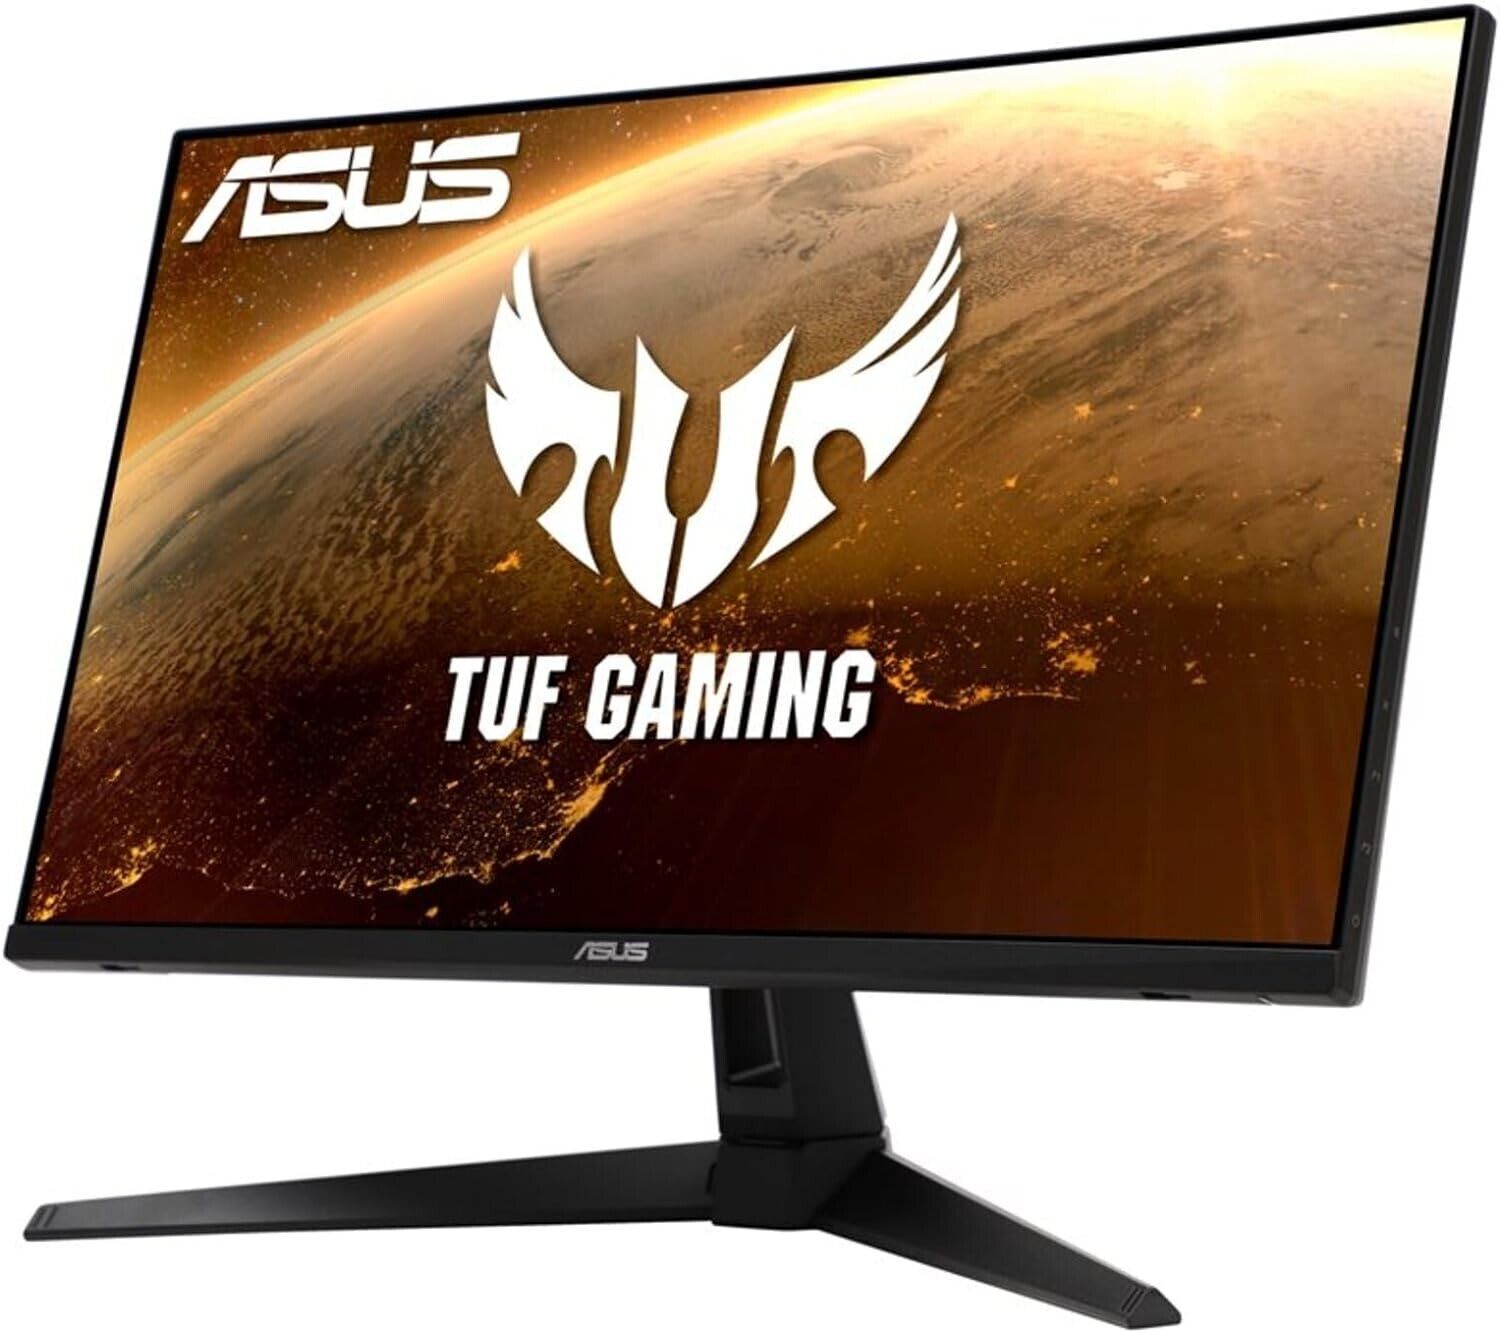 ASUS TUF Gaming VG279Q1A 27” Gaming Monitor, 1080P Full HD, 165Hz (Supports 144H